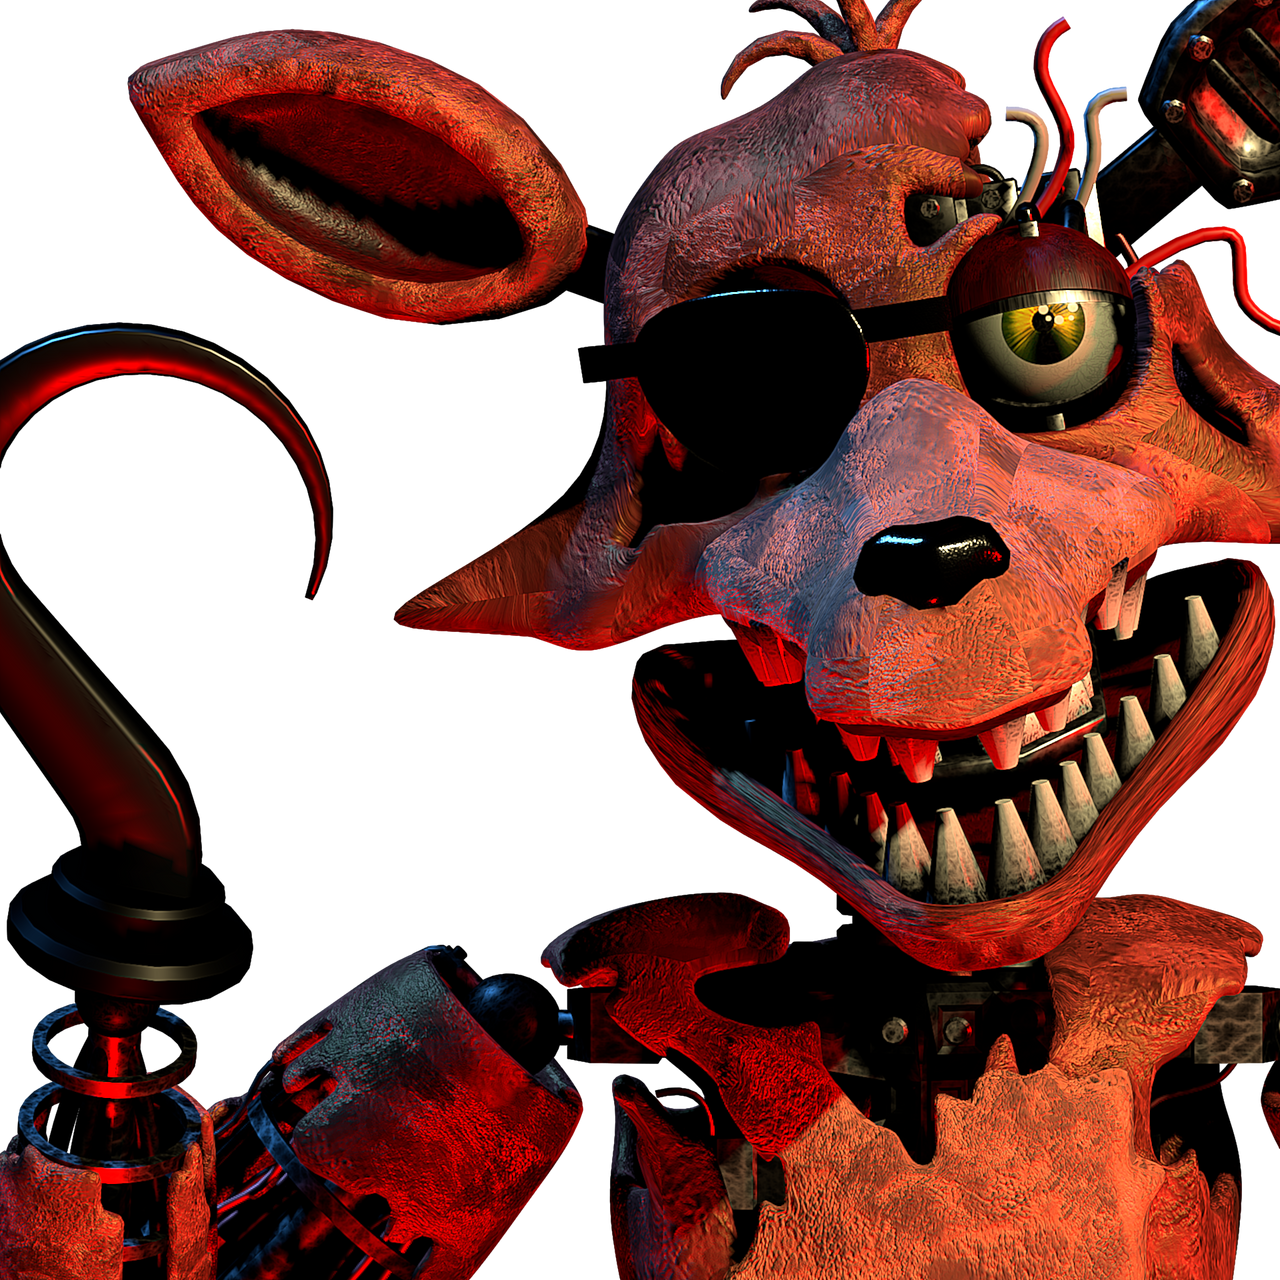 Organic Withered Foxy (FNAF Fanart) by SnarkyTeaSipper on DeviantArt